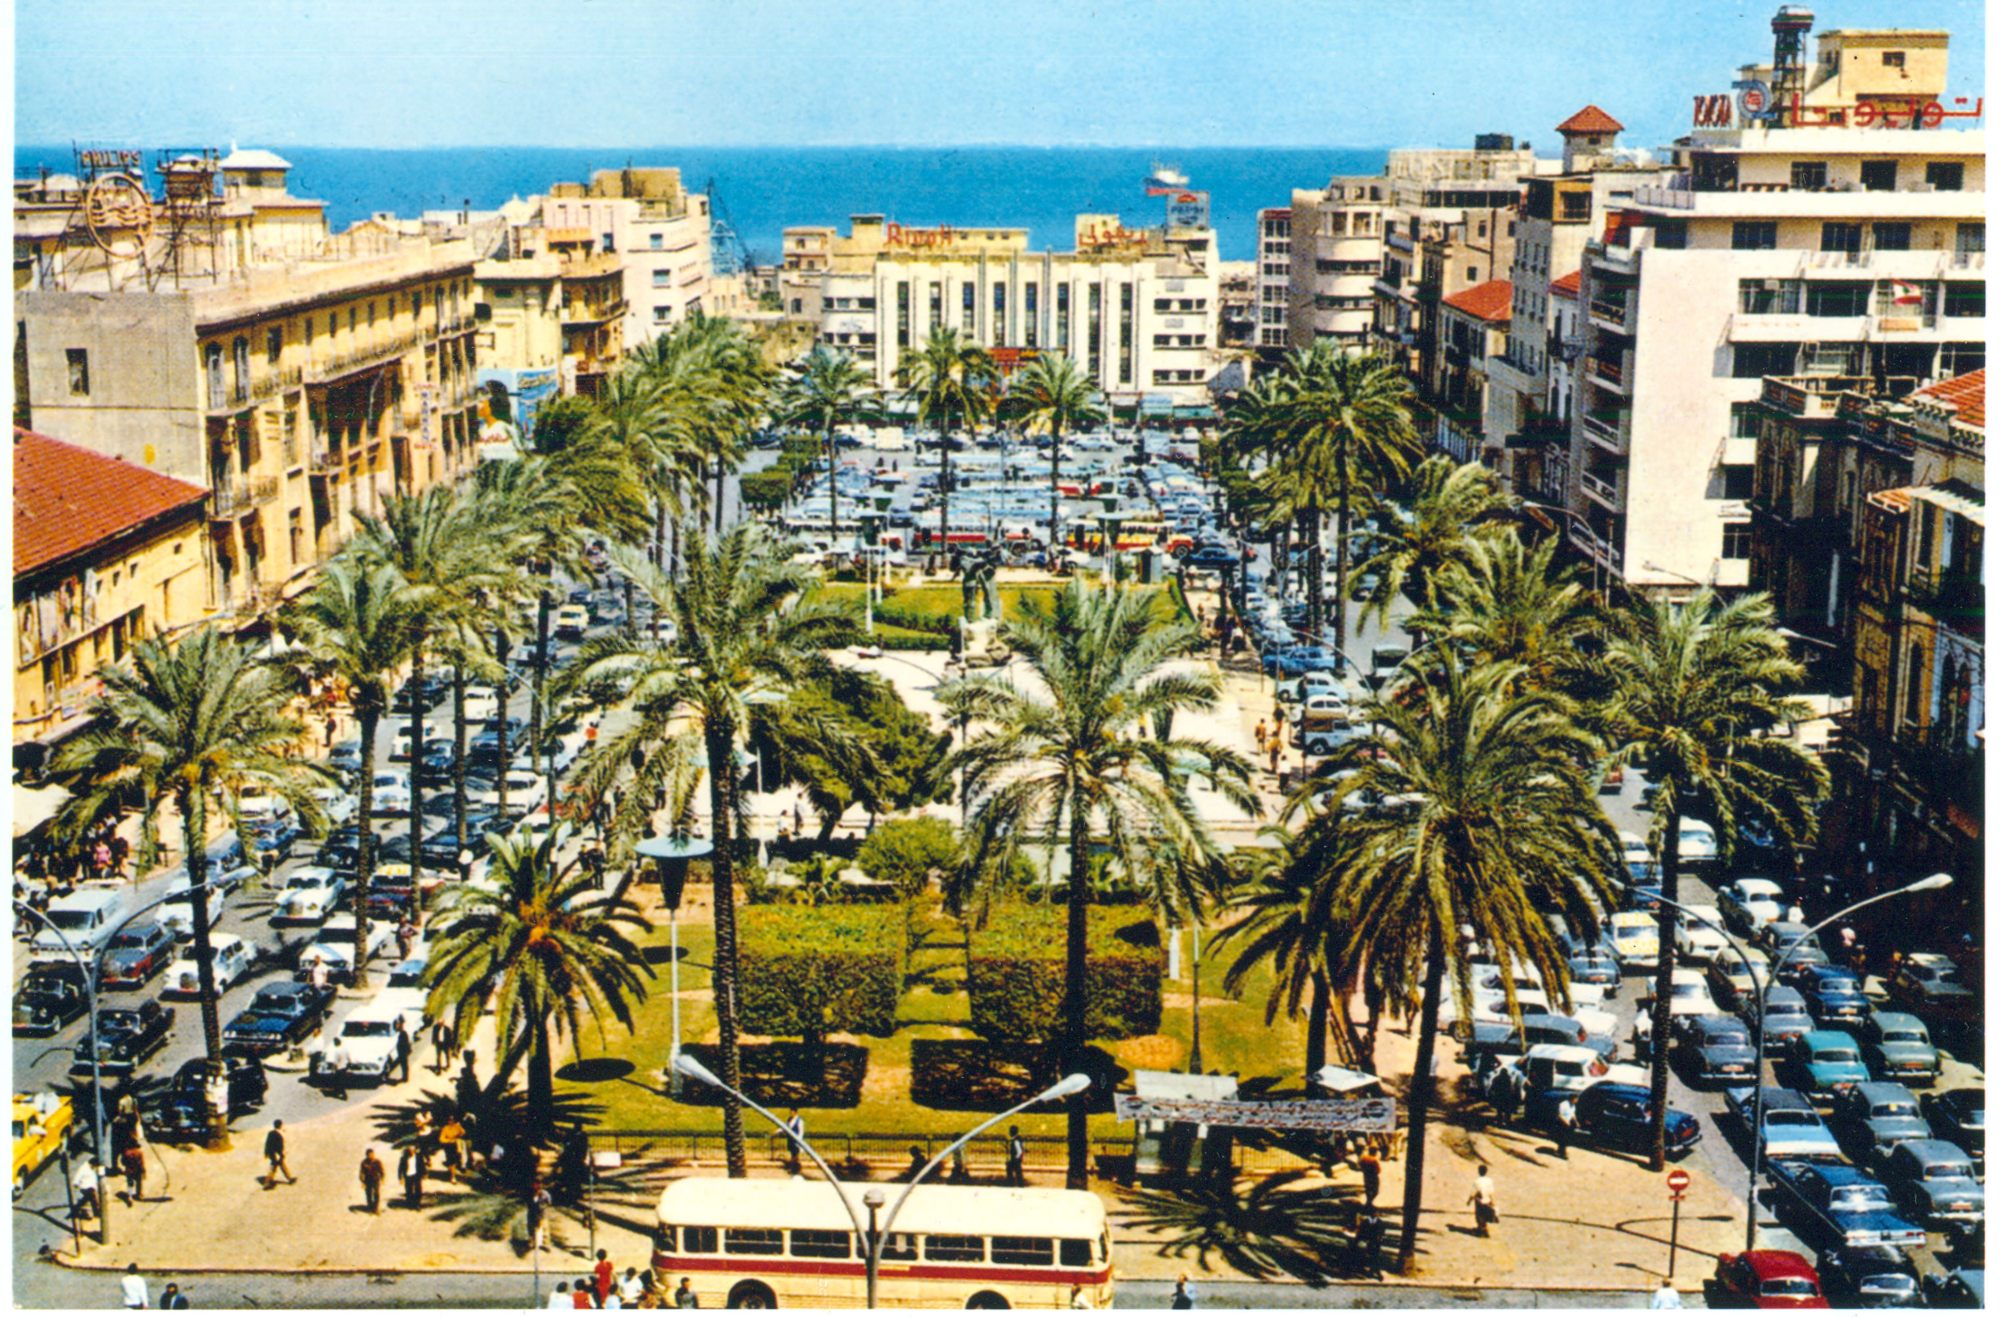 A file photo of Beirut's Martyrs’ Square in the 1960s, before the war (Wikimedia)